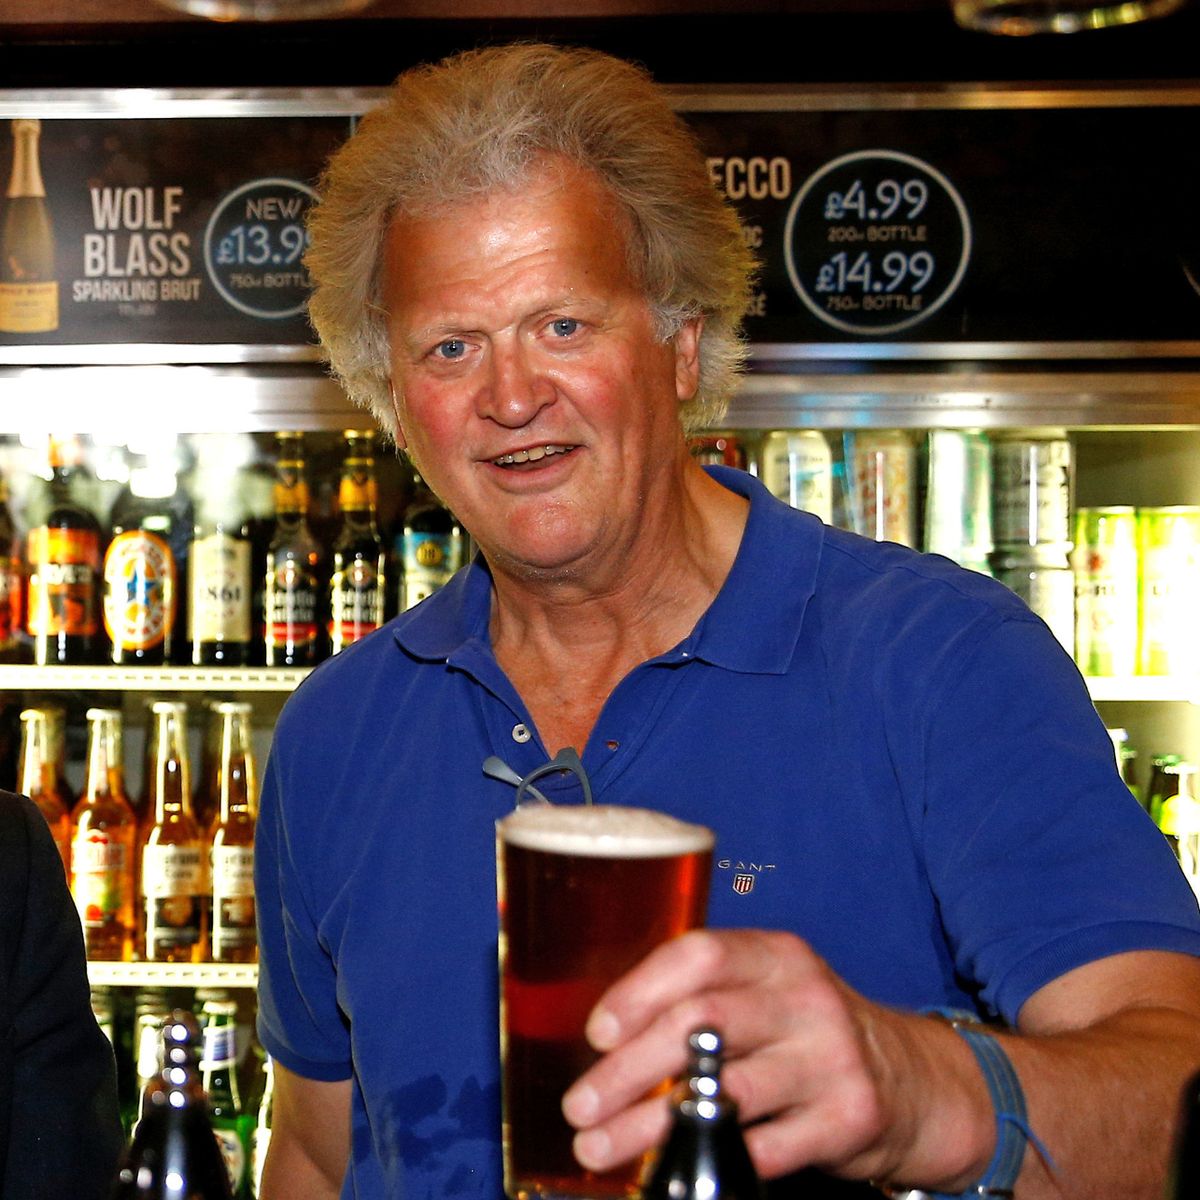 Wetherspoons boss Tim Martin receives a knighthood in new years honours list for services to business even though Wetherspoons have made a loss close to £300million in last 5 years and numerous branches have closed down.